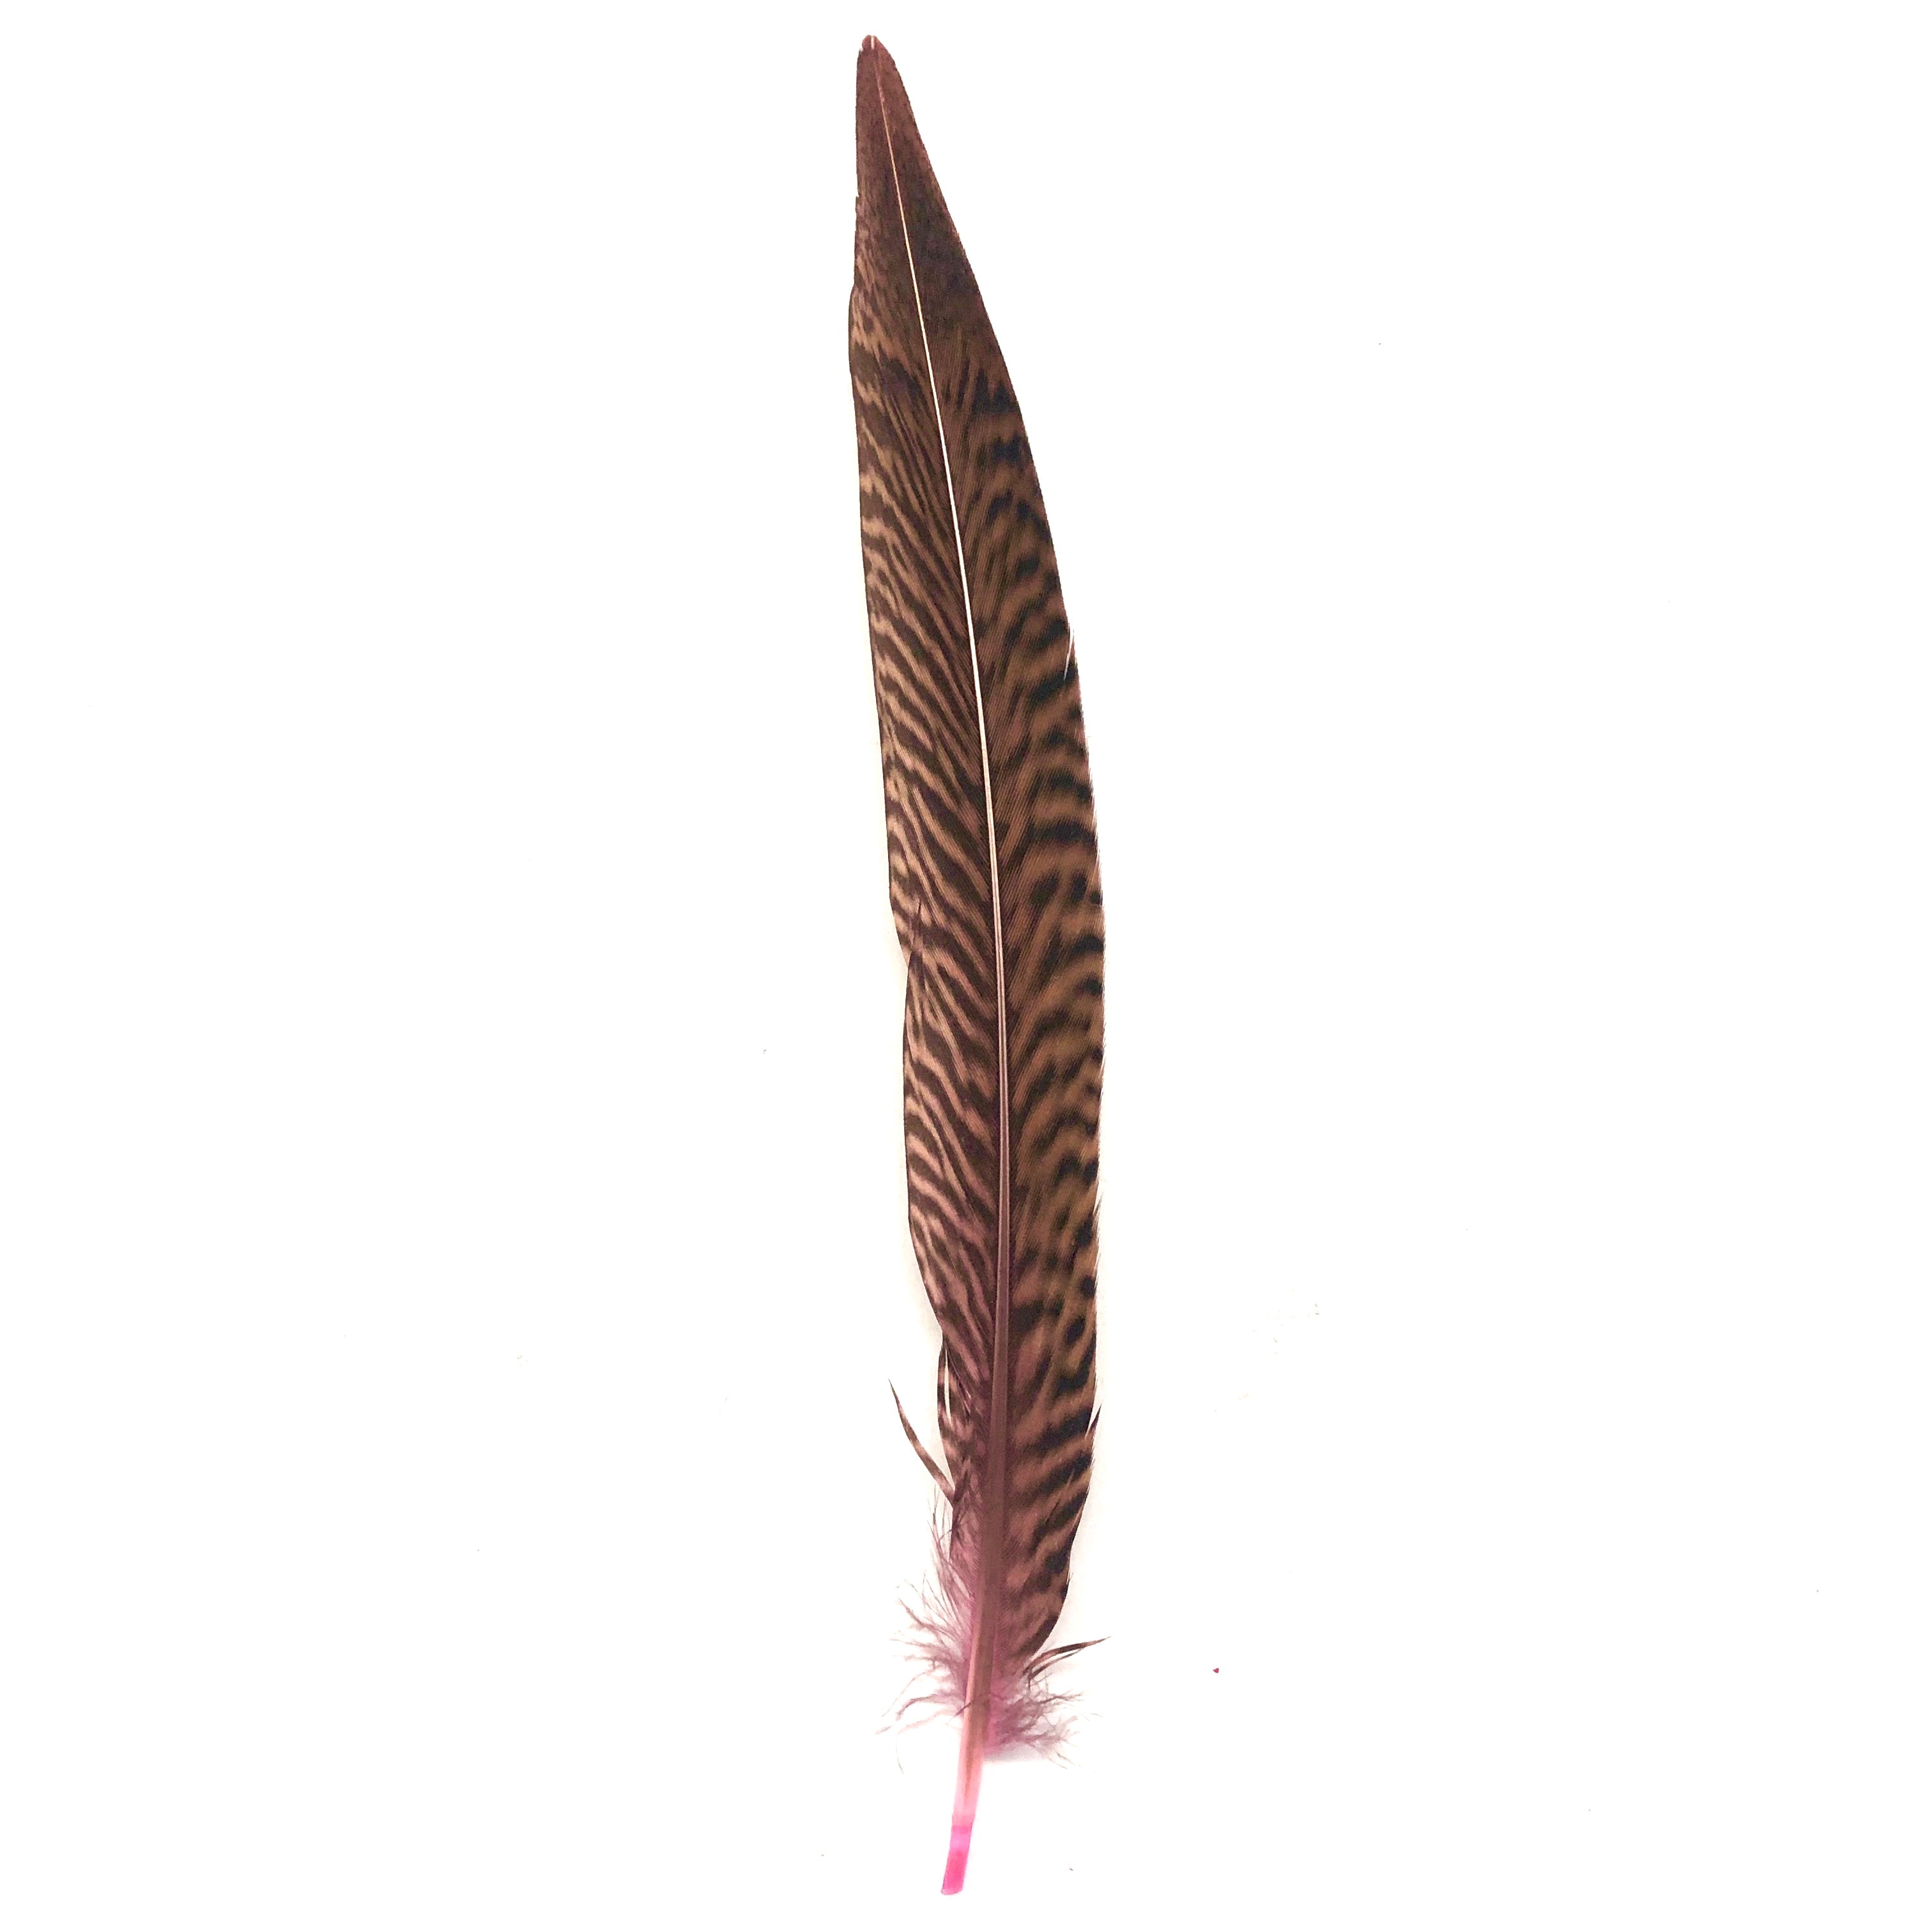 6" to 10" Golden Pheasant Side Tail Feather x 10 pcs - Pink